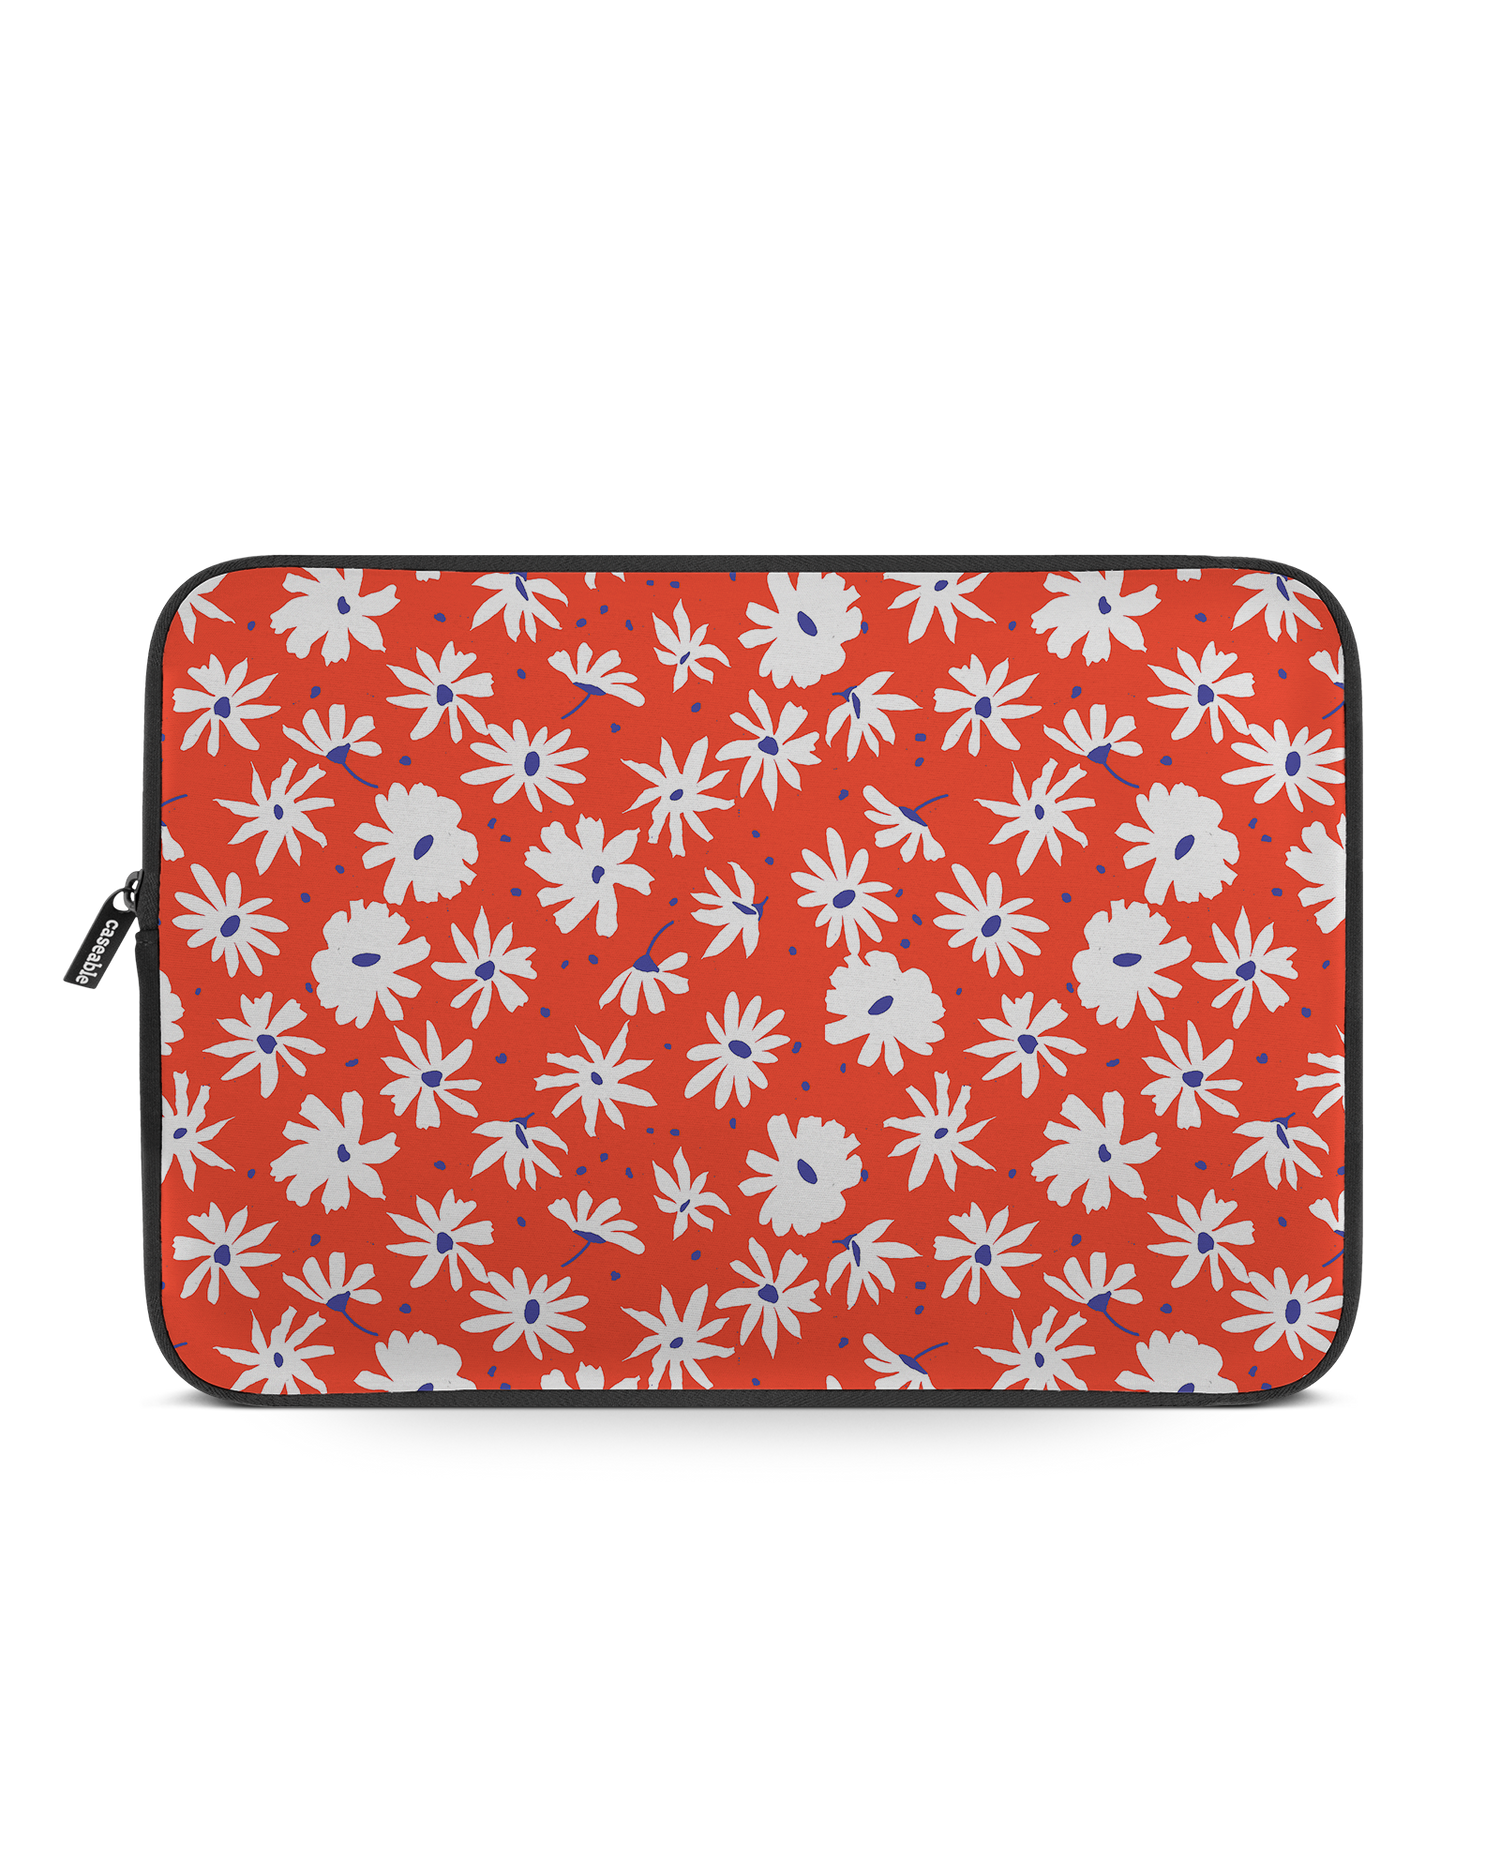 Retro Daisy Laptop Case 14 inch: Front View